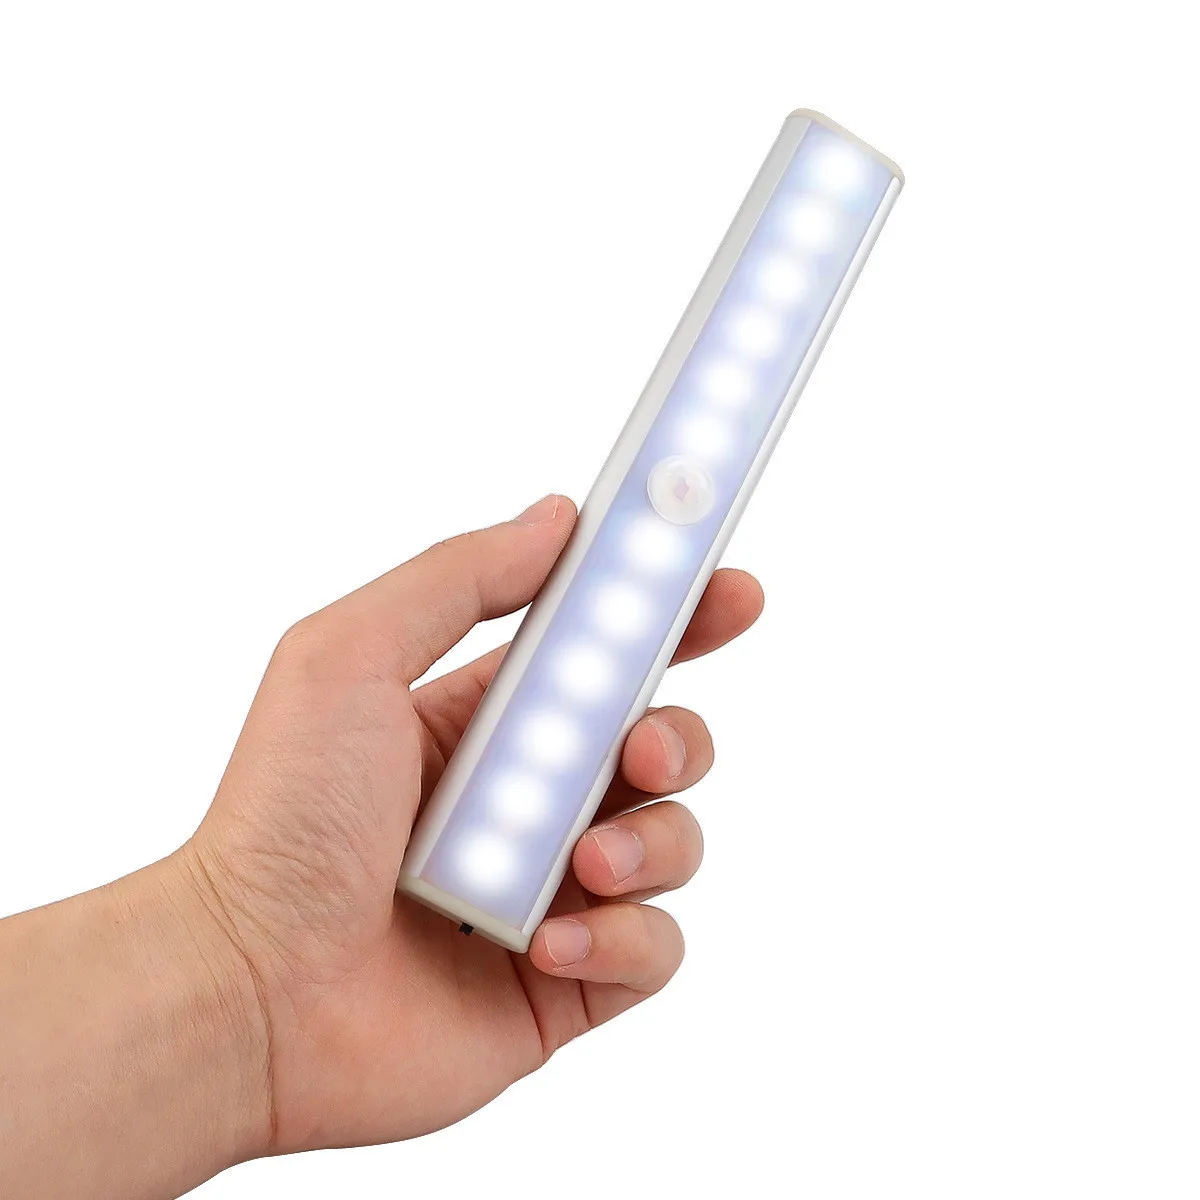 Battery Powered 10-led Wireless Motion Sensing Stick-on Anywhere Step LED Light Bar with Magnetic Strip